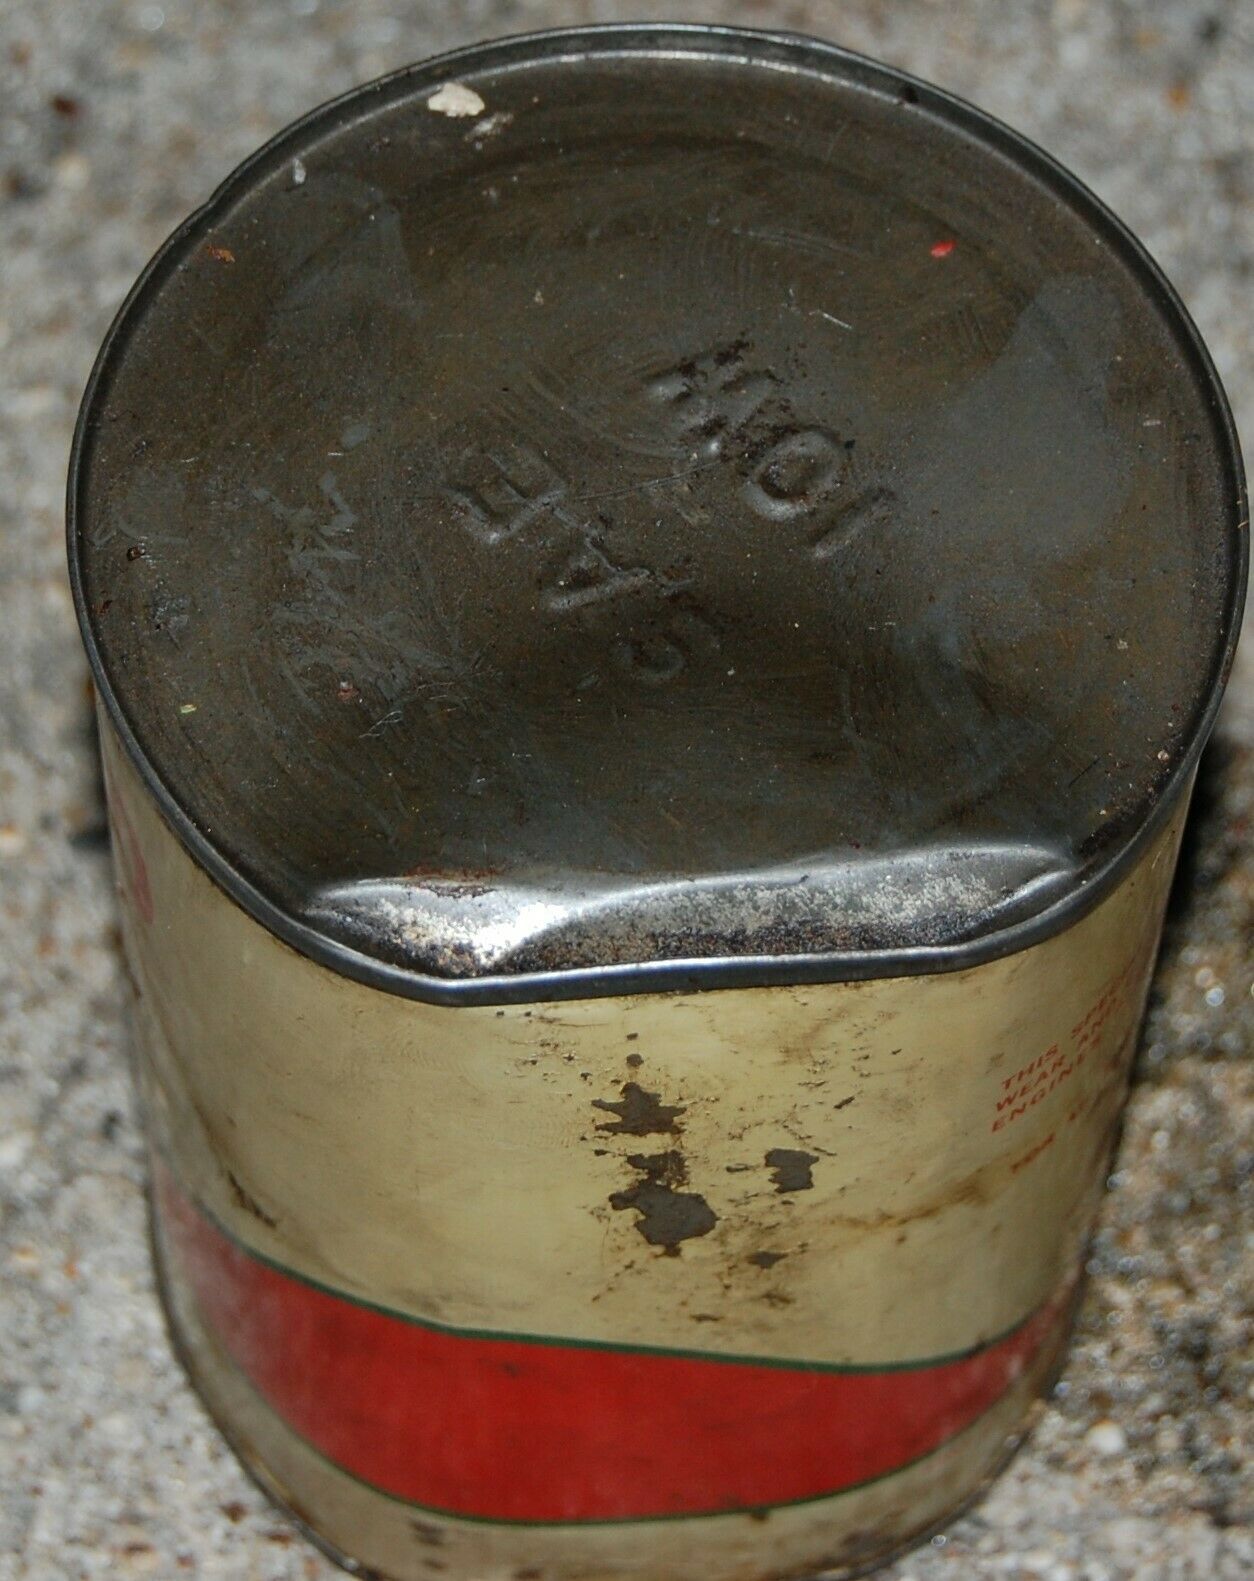 Vintage Oil Can Texaco Motor Oil One Quart Metal Can